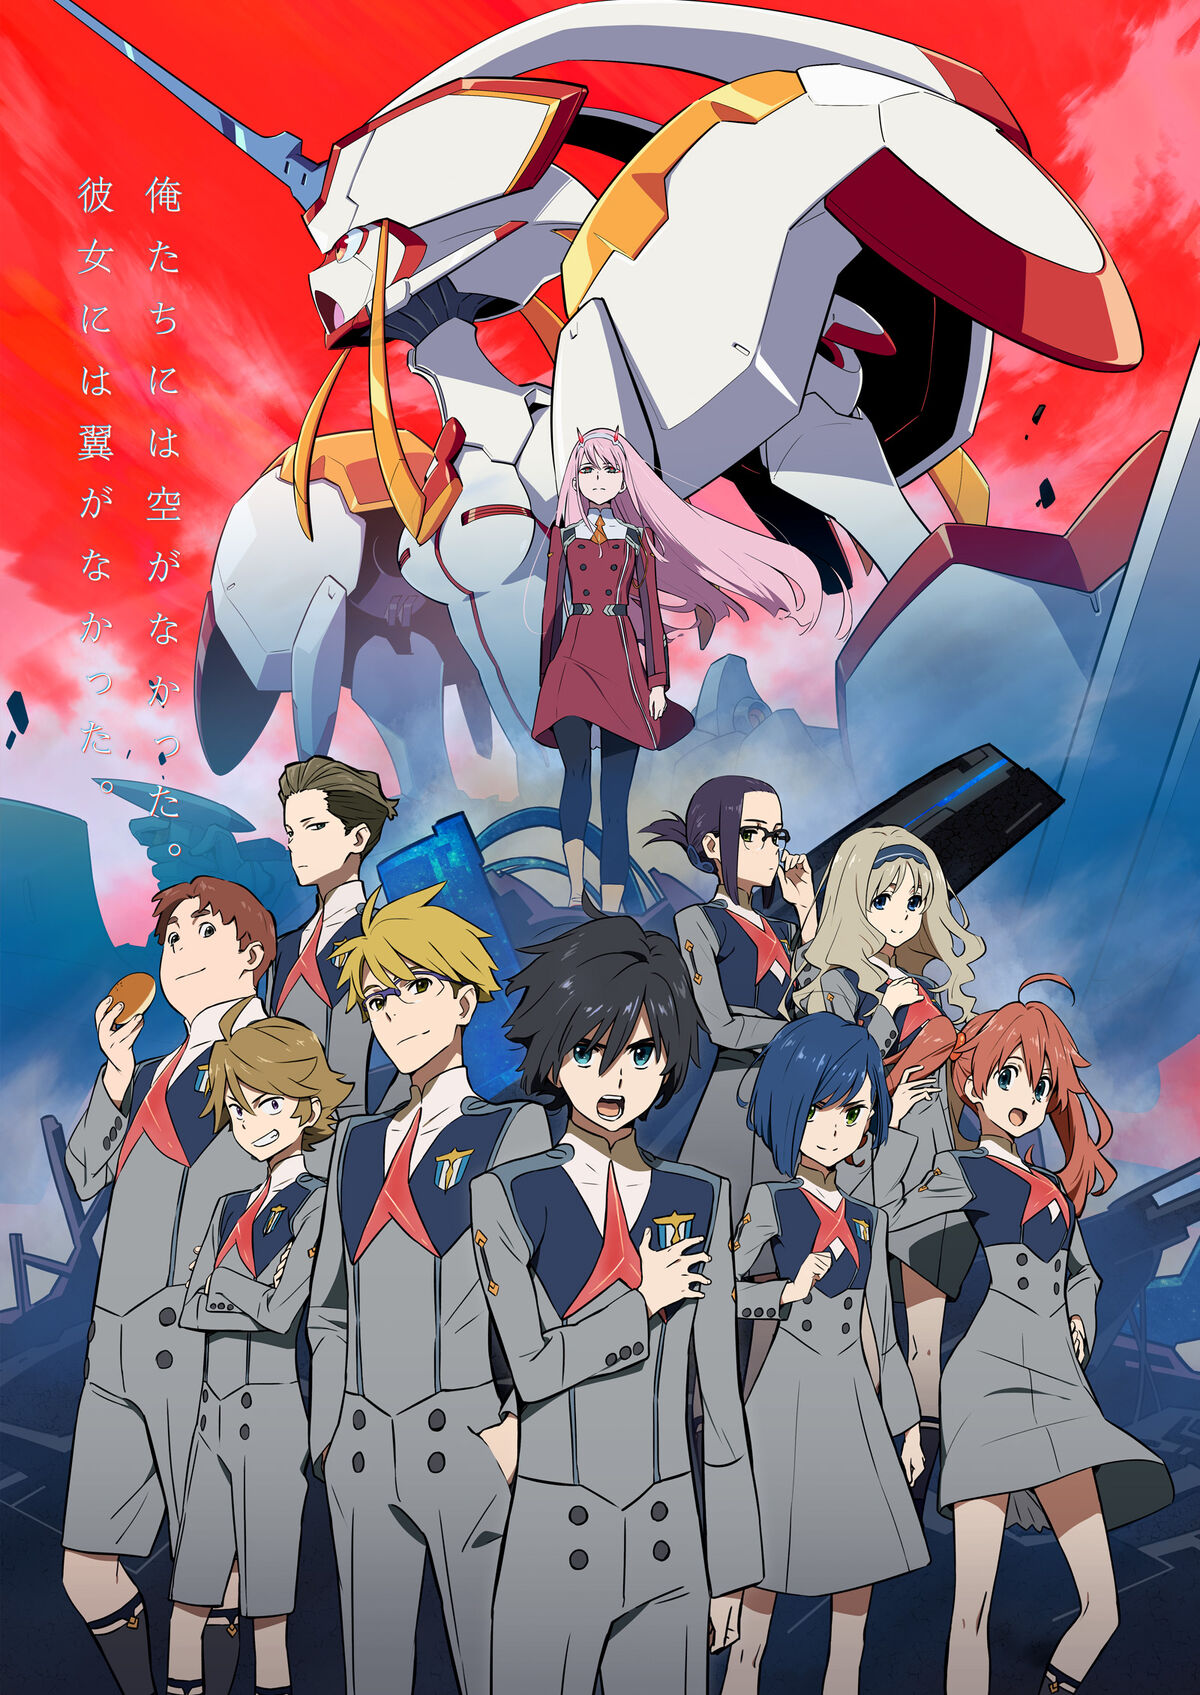 Qoo News] TV anime DARLING in the FRANKXX's 1st trailer reveals cast and  plot